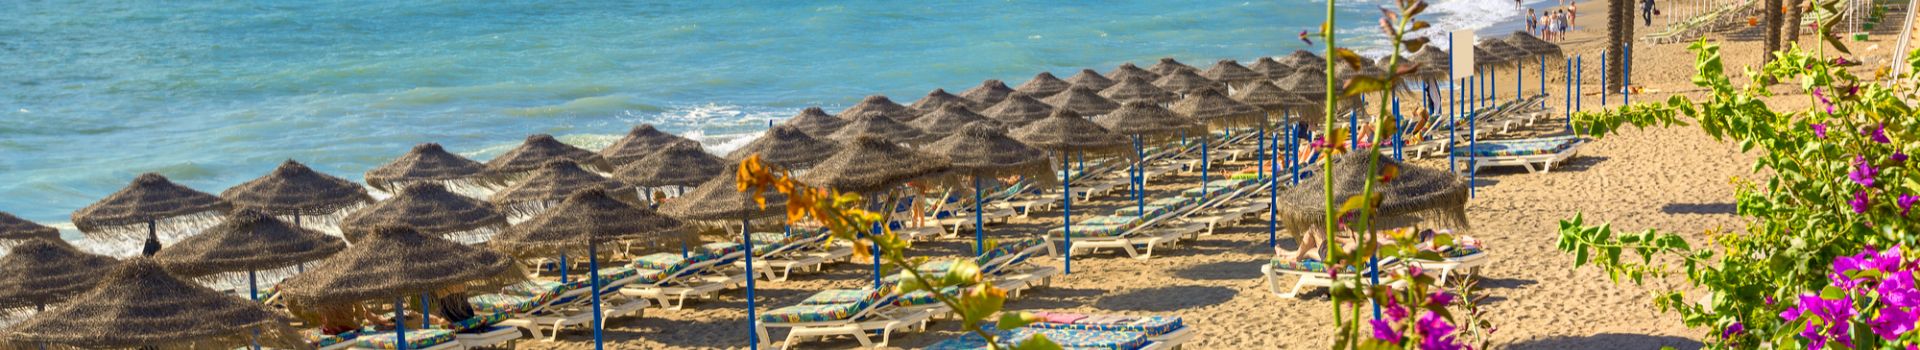 Costa del Sol holiday guide - Cassidy Travel Blog